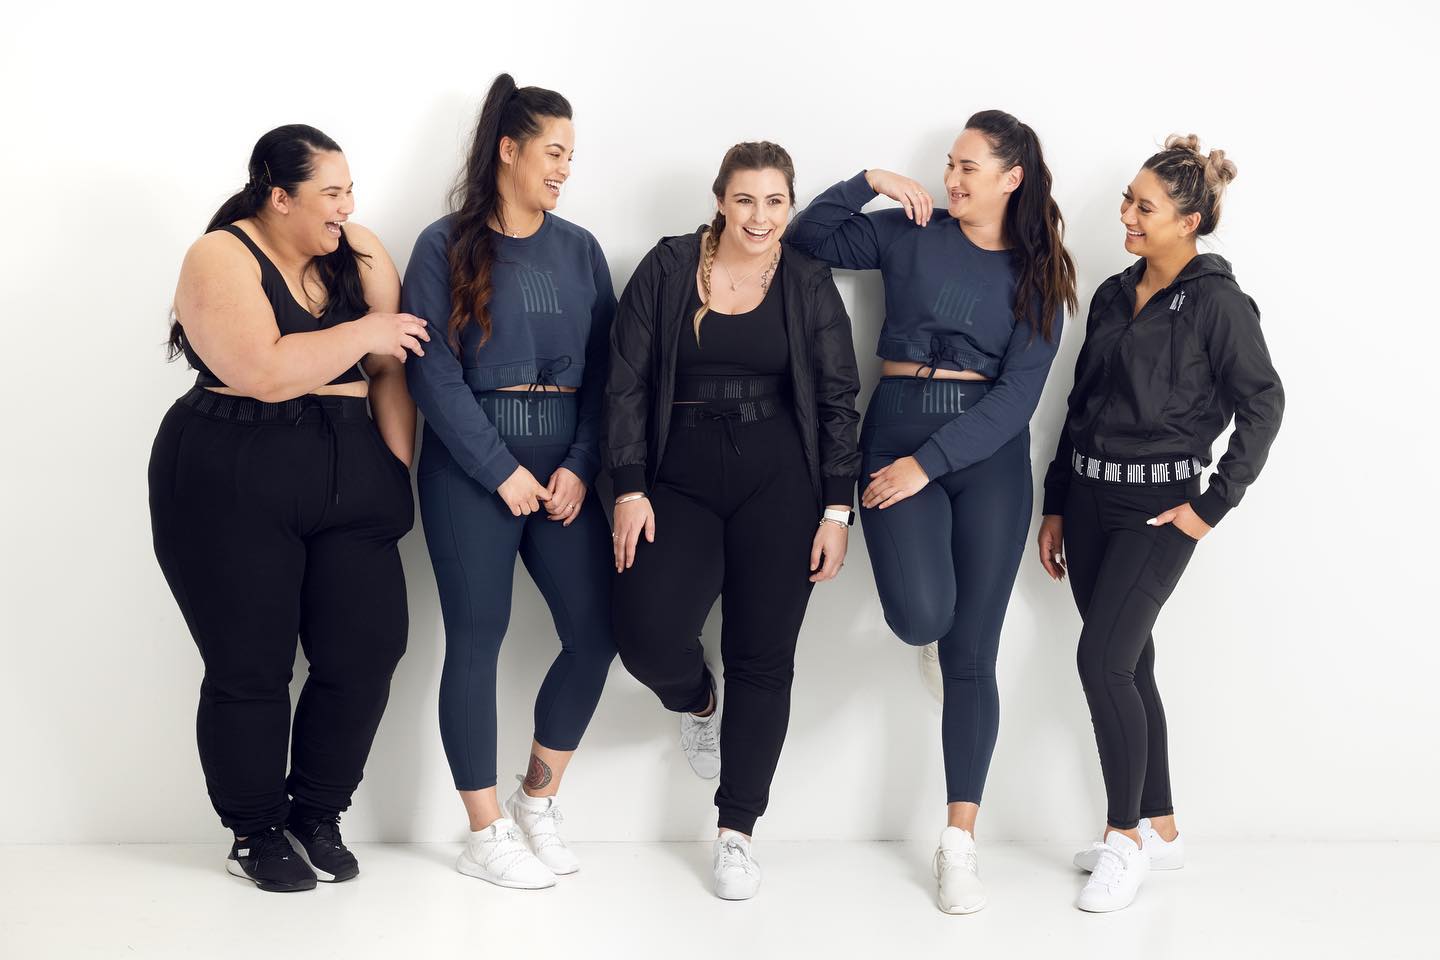 Diversity in Fashion: New Zealand activewear brand Hine Collection